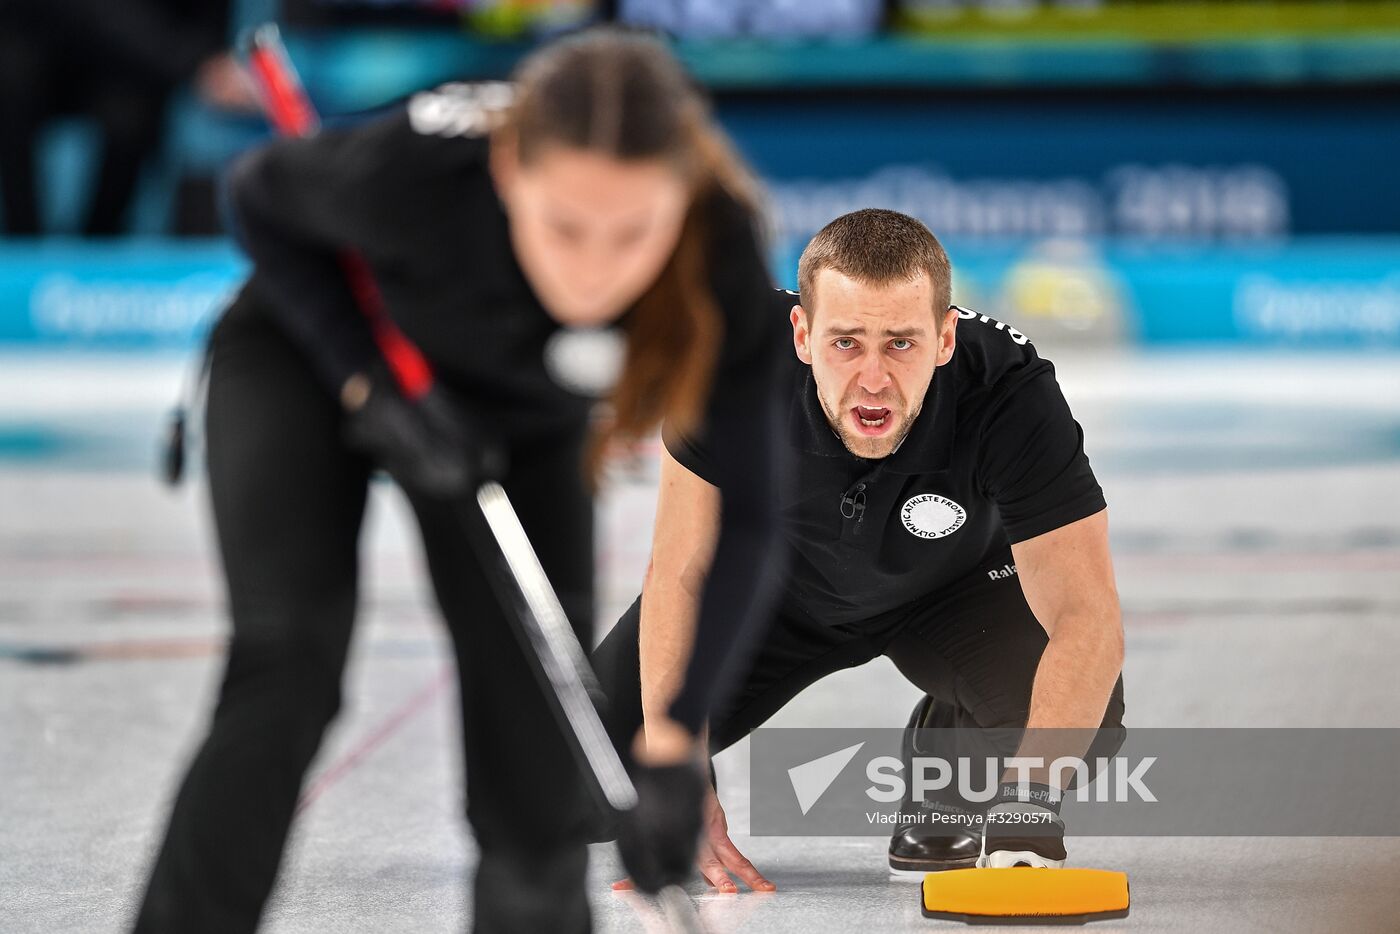 2018 Olympics. Curling. Mixed doubles. Russia vs. Norway